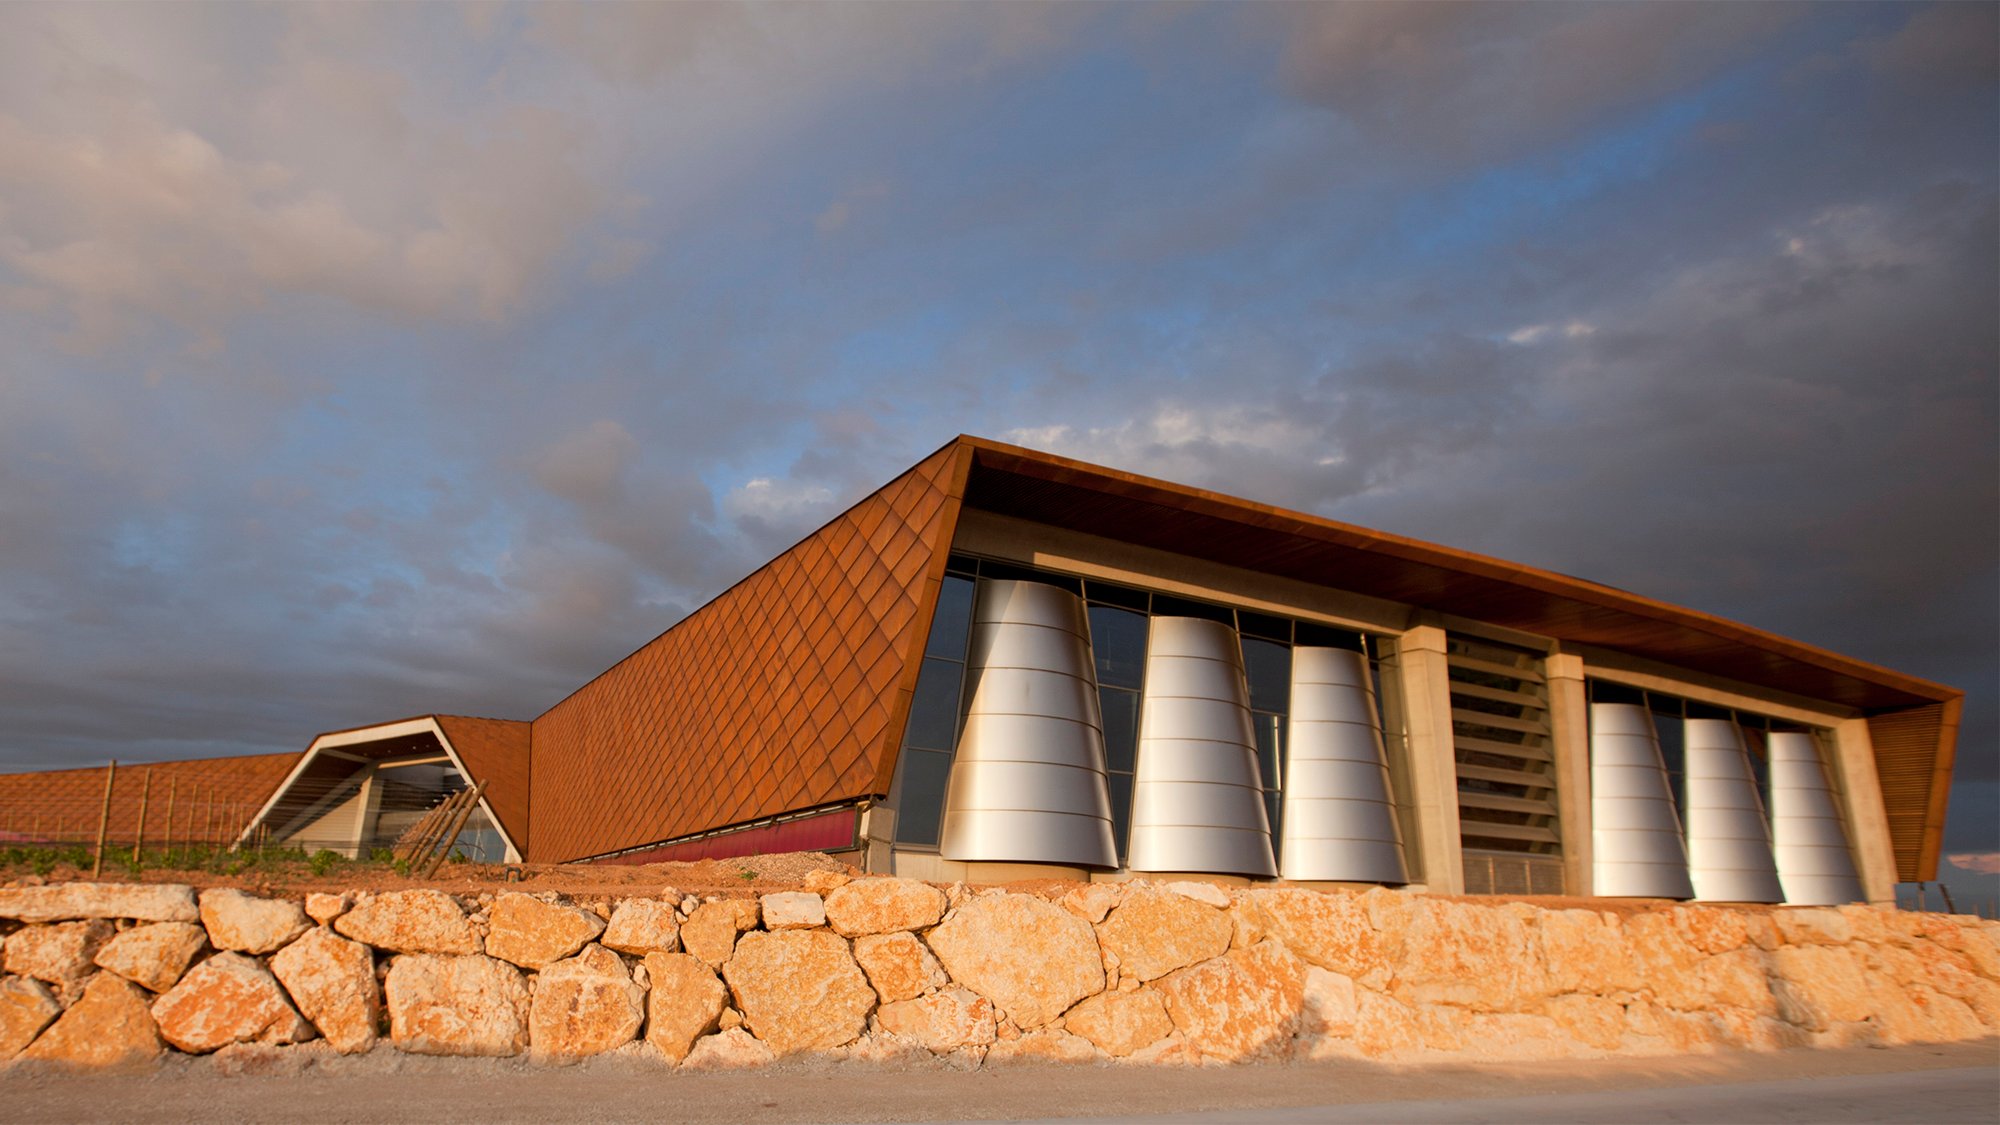 The Portia winery in the province of Burgos, Spain. 